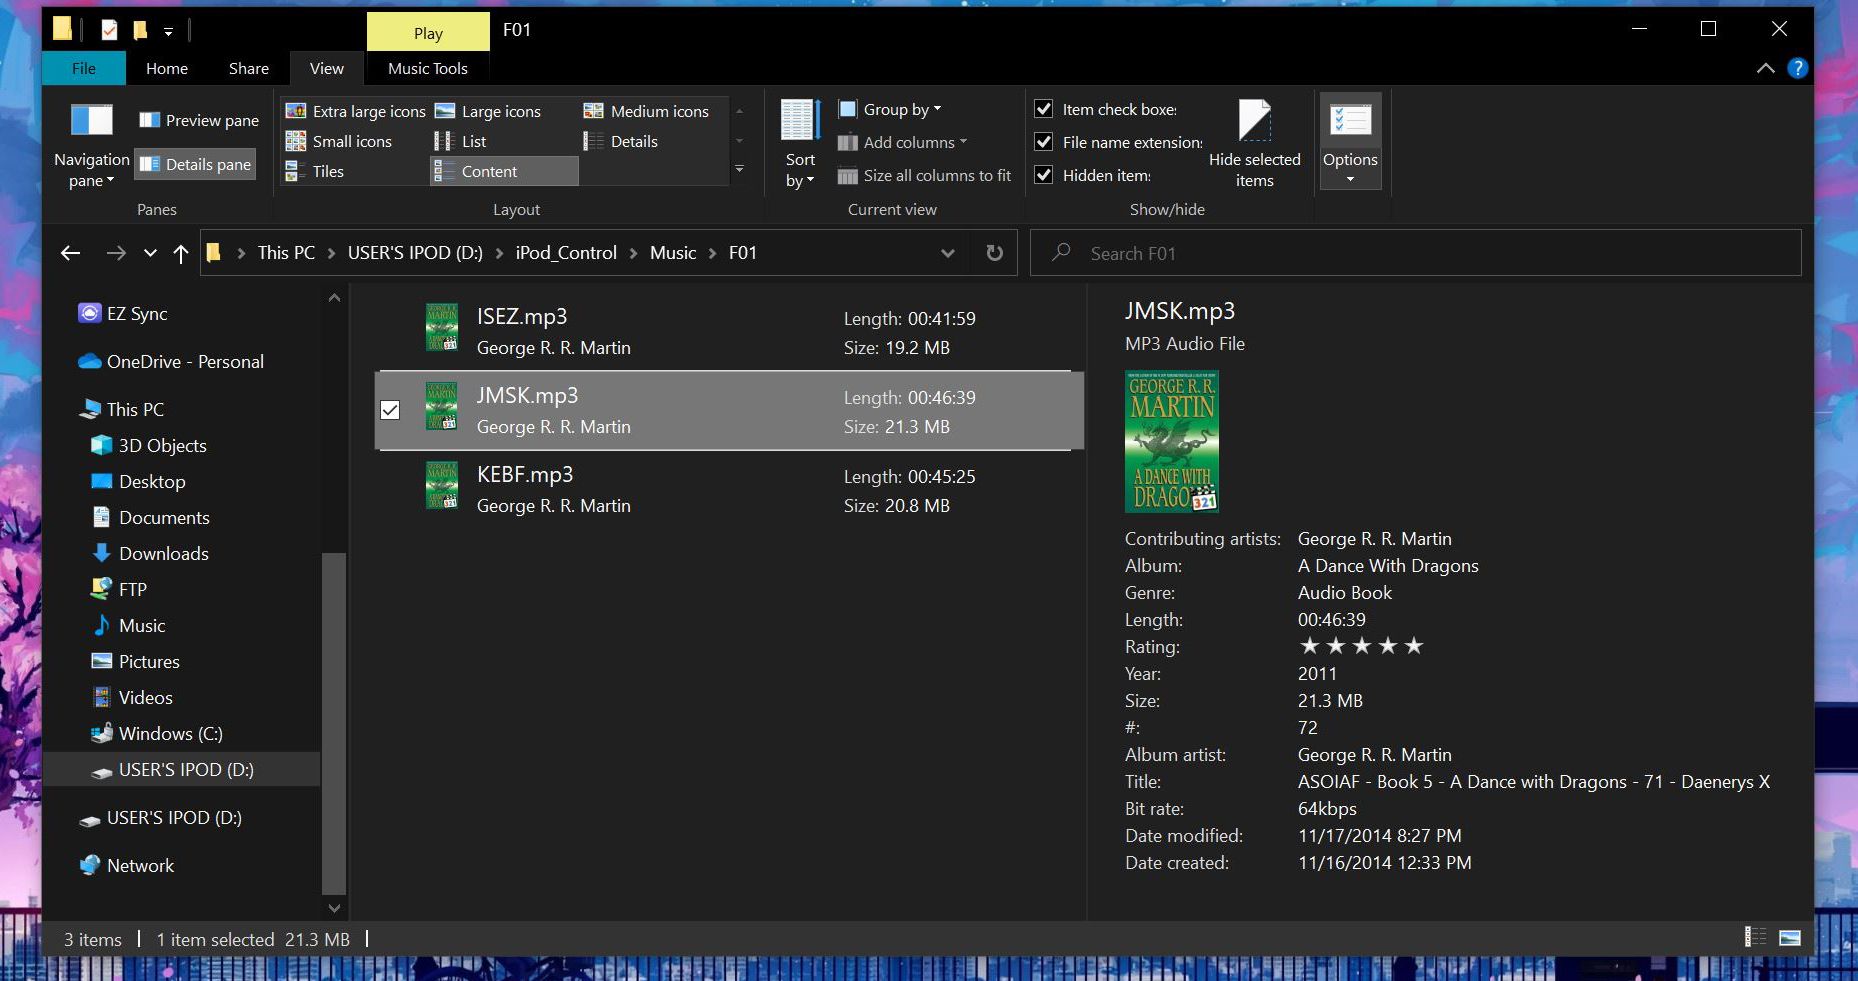 Itunes Nano example tag information on Windows